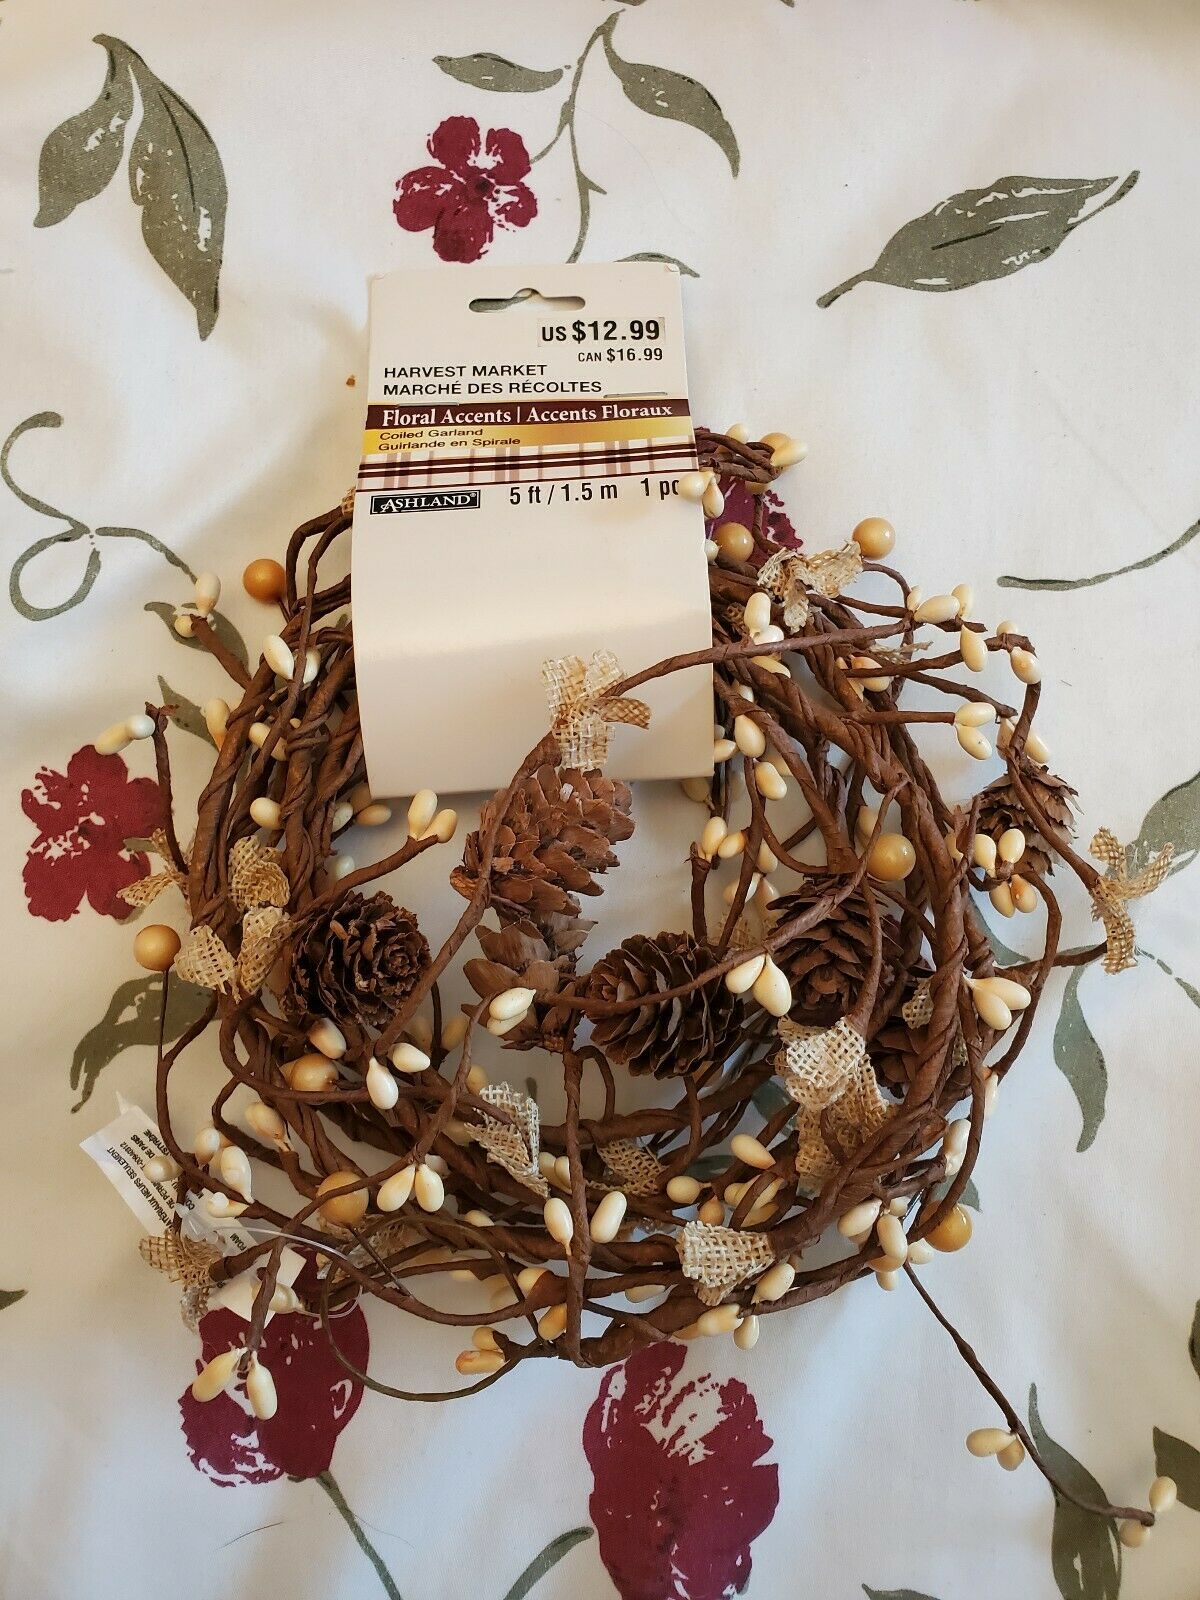 Ashland Floral Accents Garland Pinecones Fall Theme